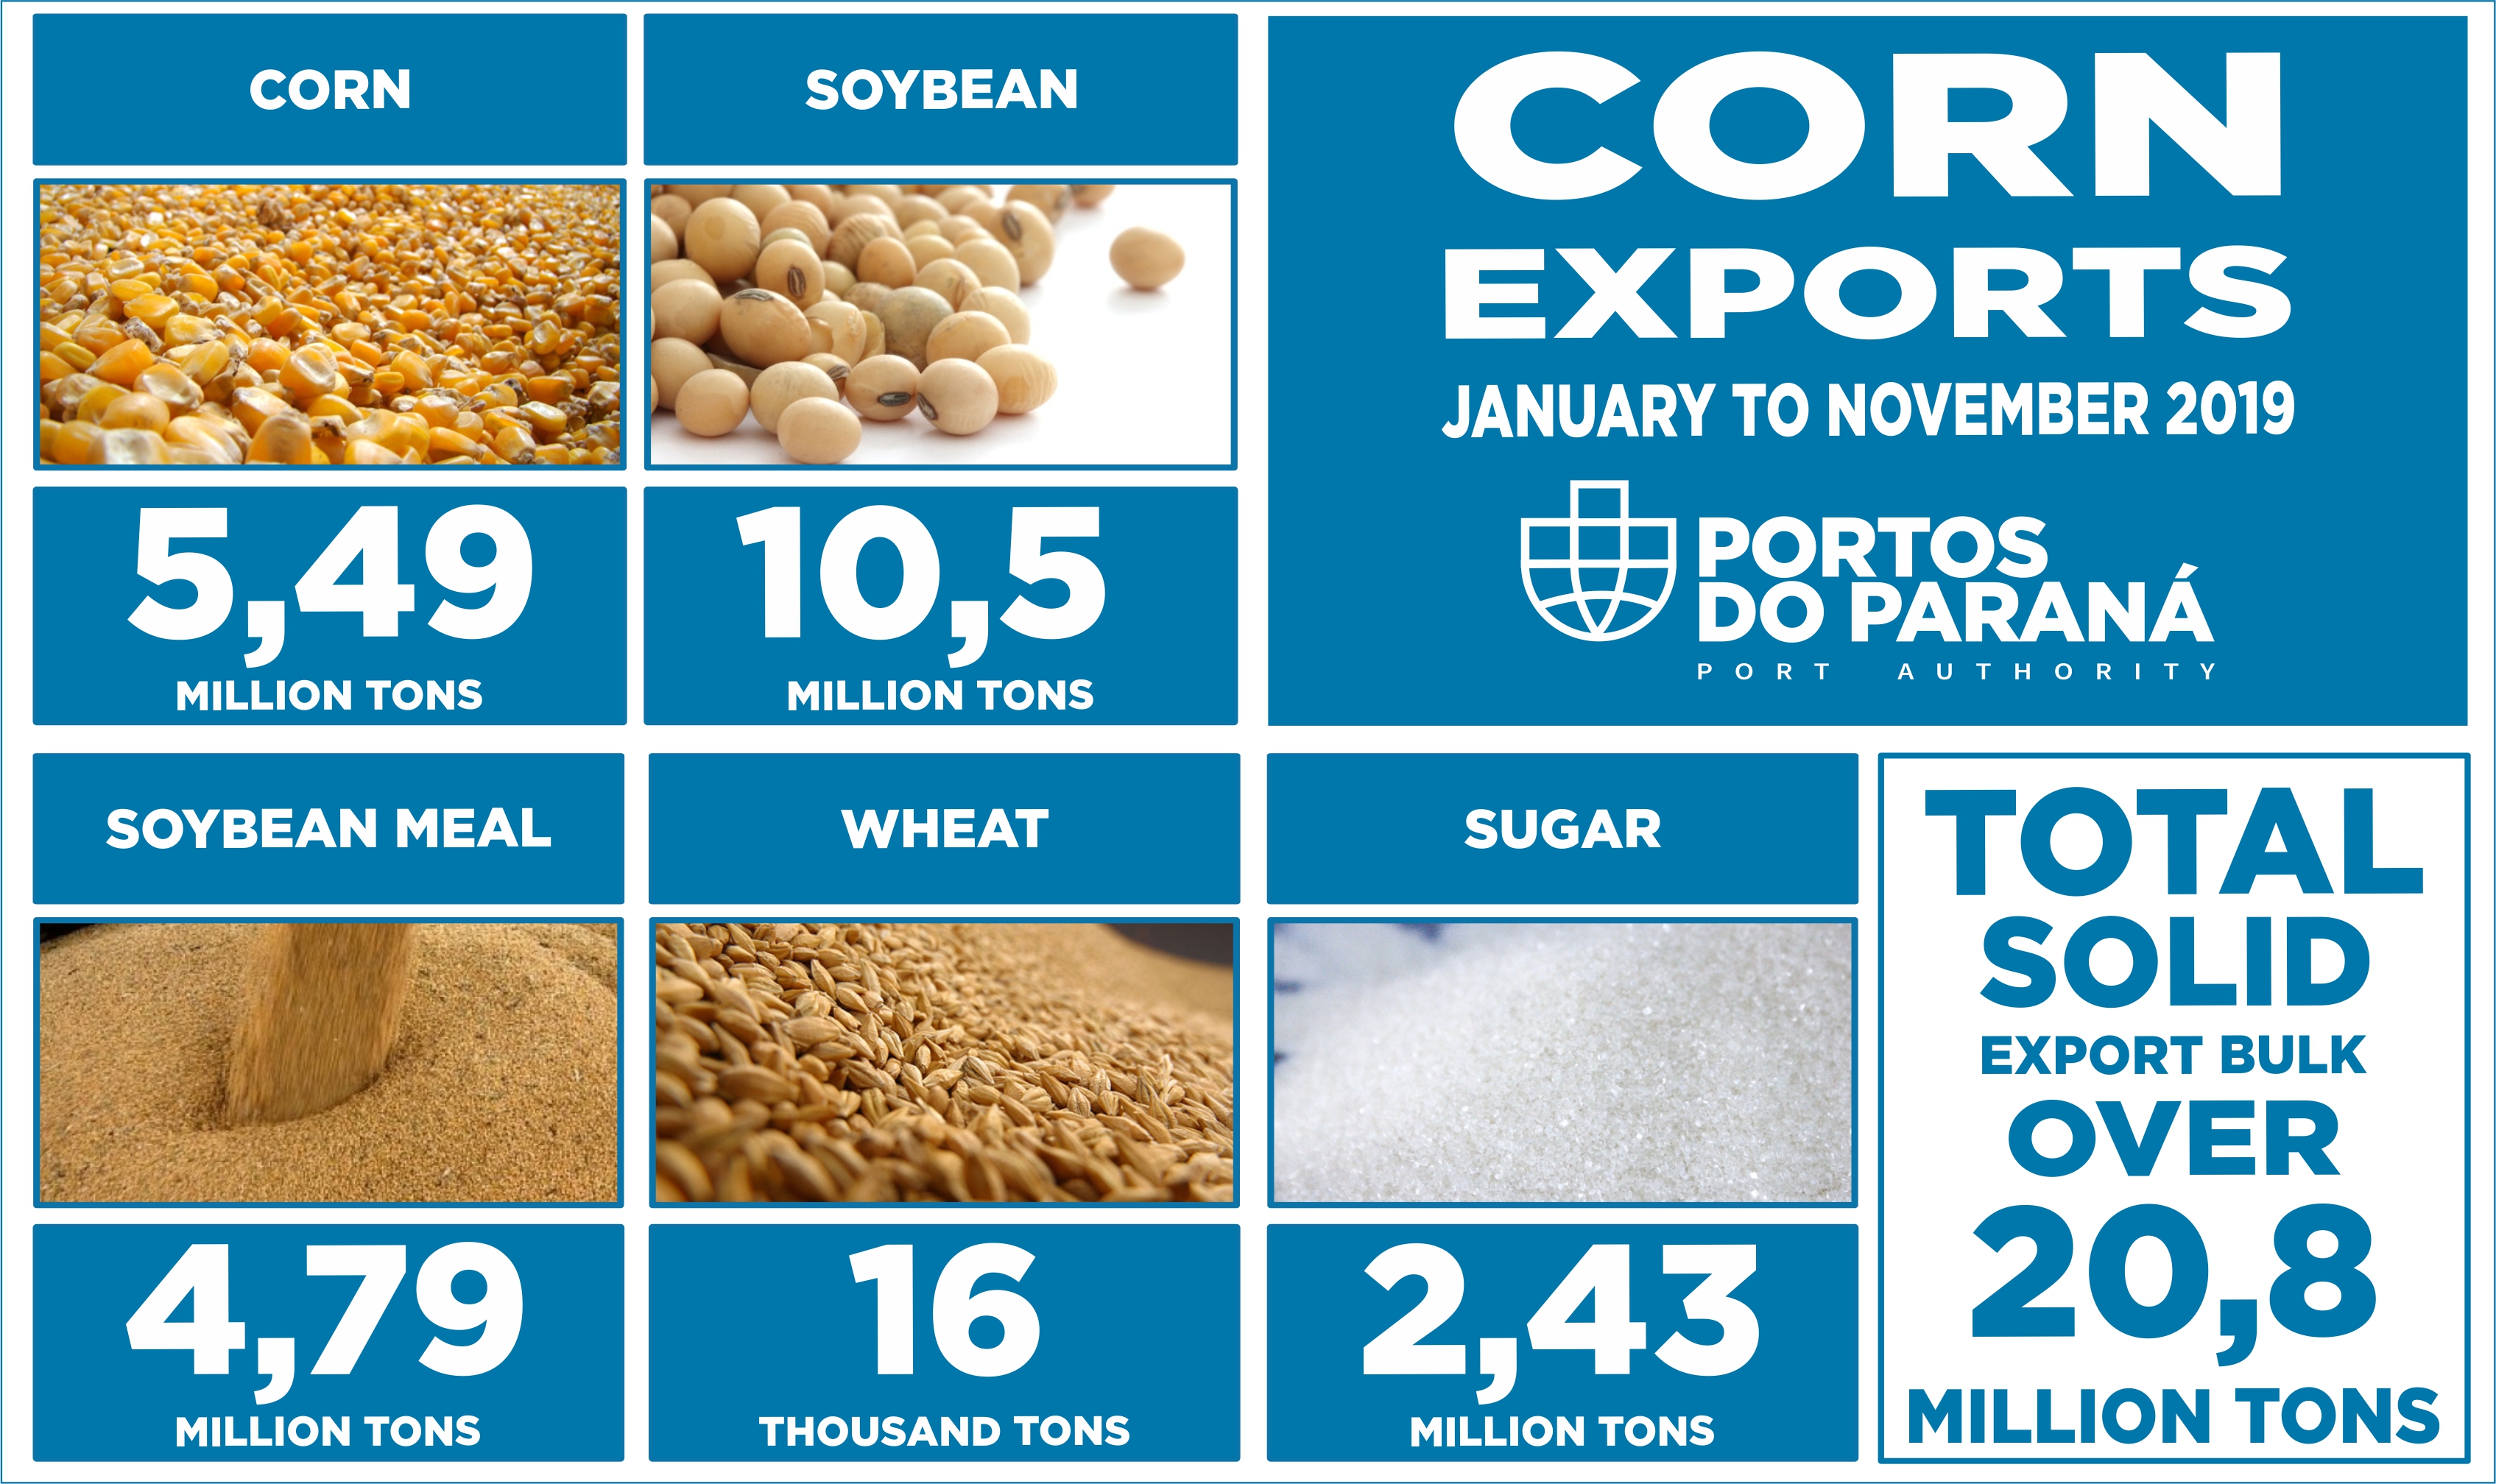 The year is not over yet, but the volume of corn exported by the Port of Paranagua already exceeds the records of the last five years. In 2019, from January to November, it goes over 5.49 million tons of grain, this represents six times more corn than shipped last year - about 911.3 thousand tons. A 503% increase.